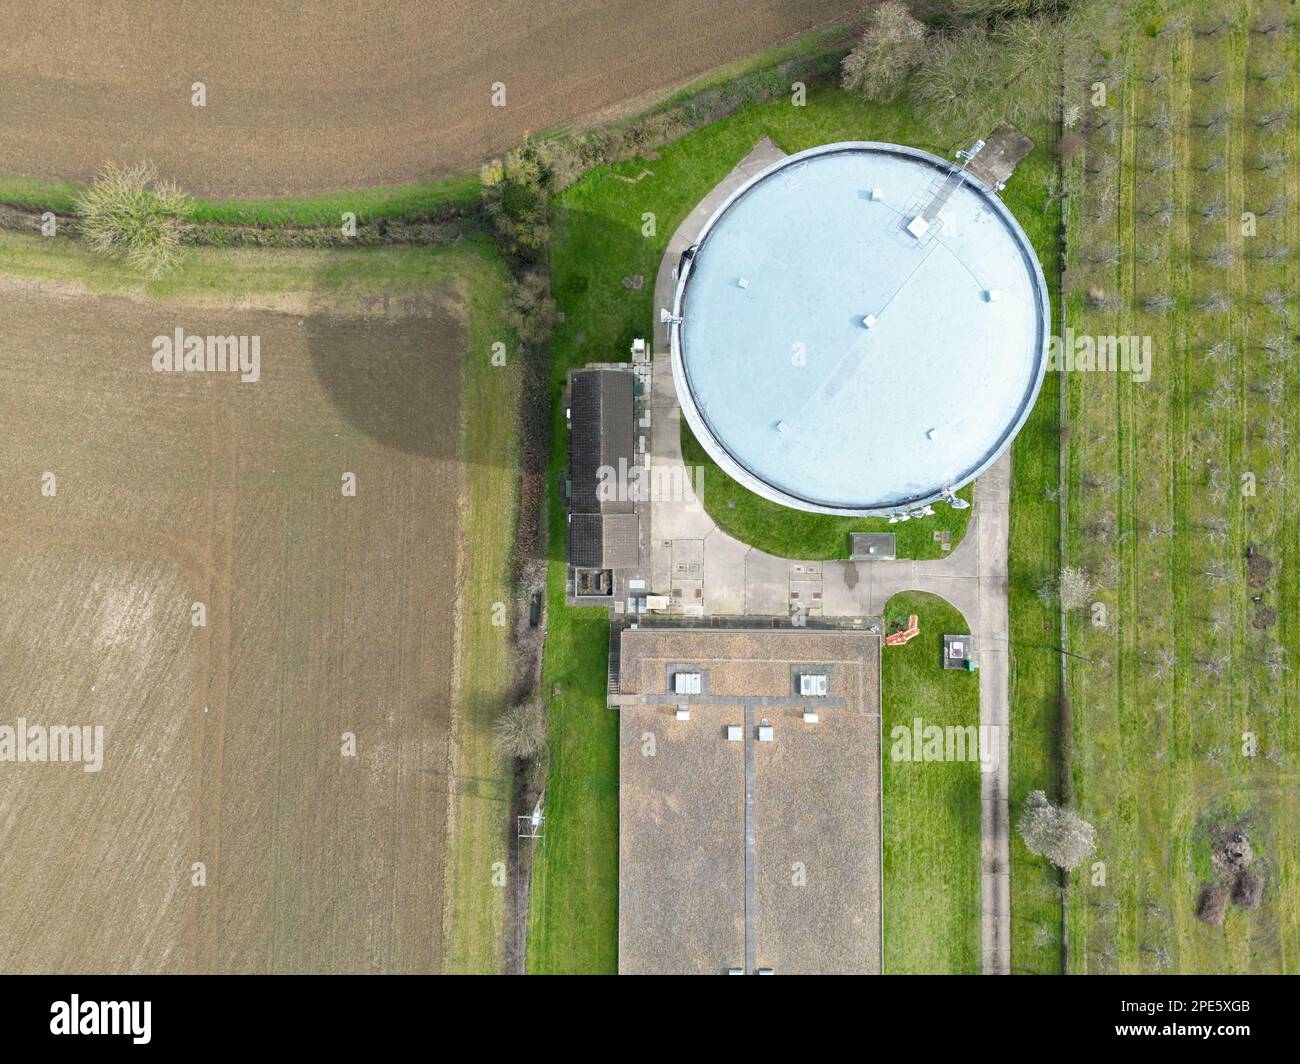 Aerial, top down view of a large water tower seen at the edge of a large shed which houses chickens. Stock Photo